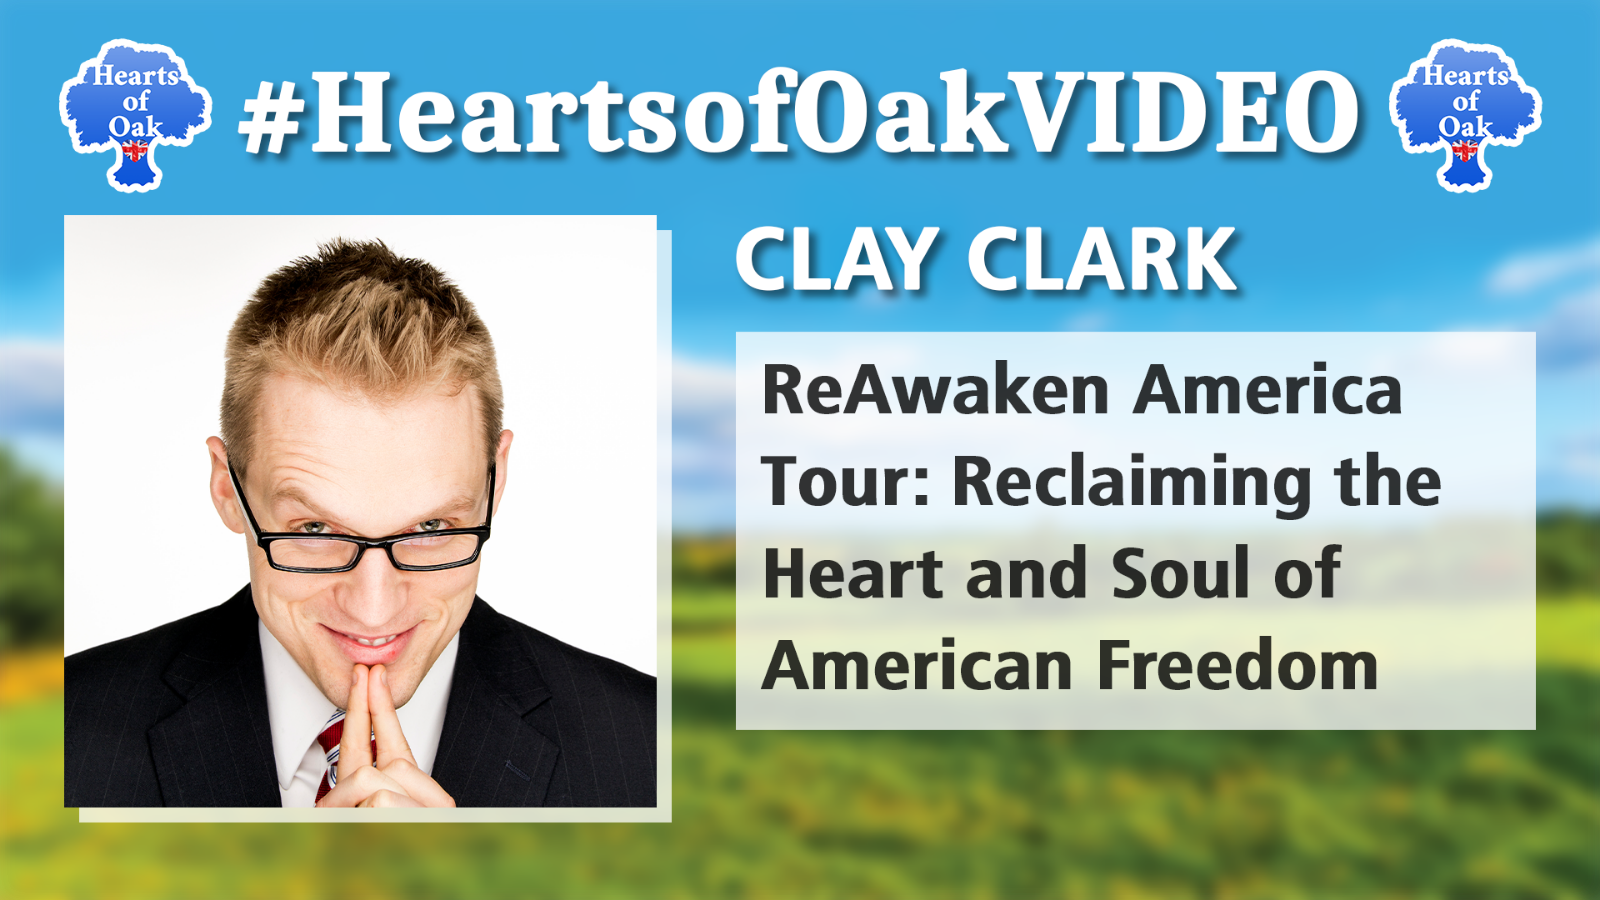 Clay Clark - ReAwaken America Tour: Reclaiming the Heart and Soul of American Freedom